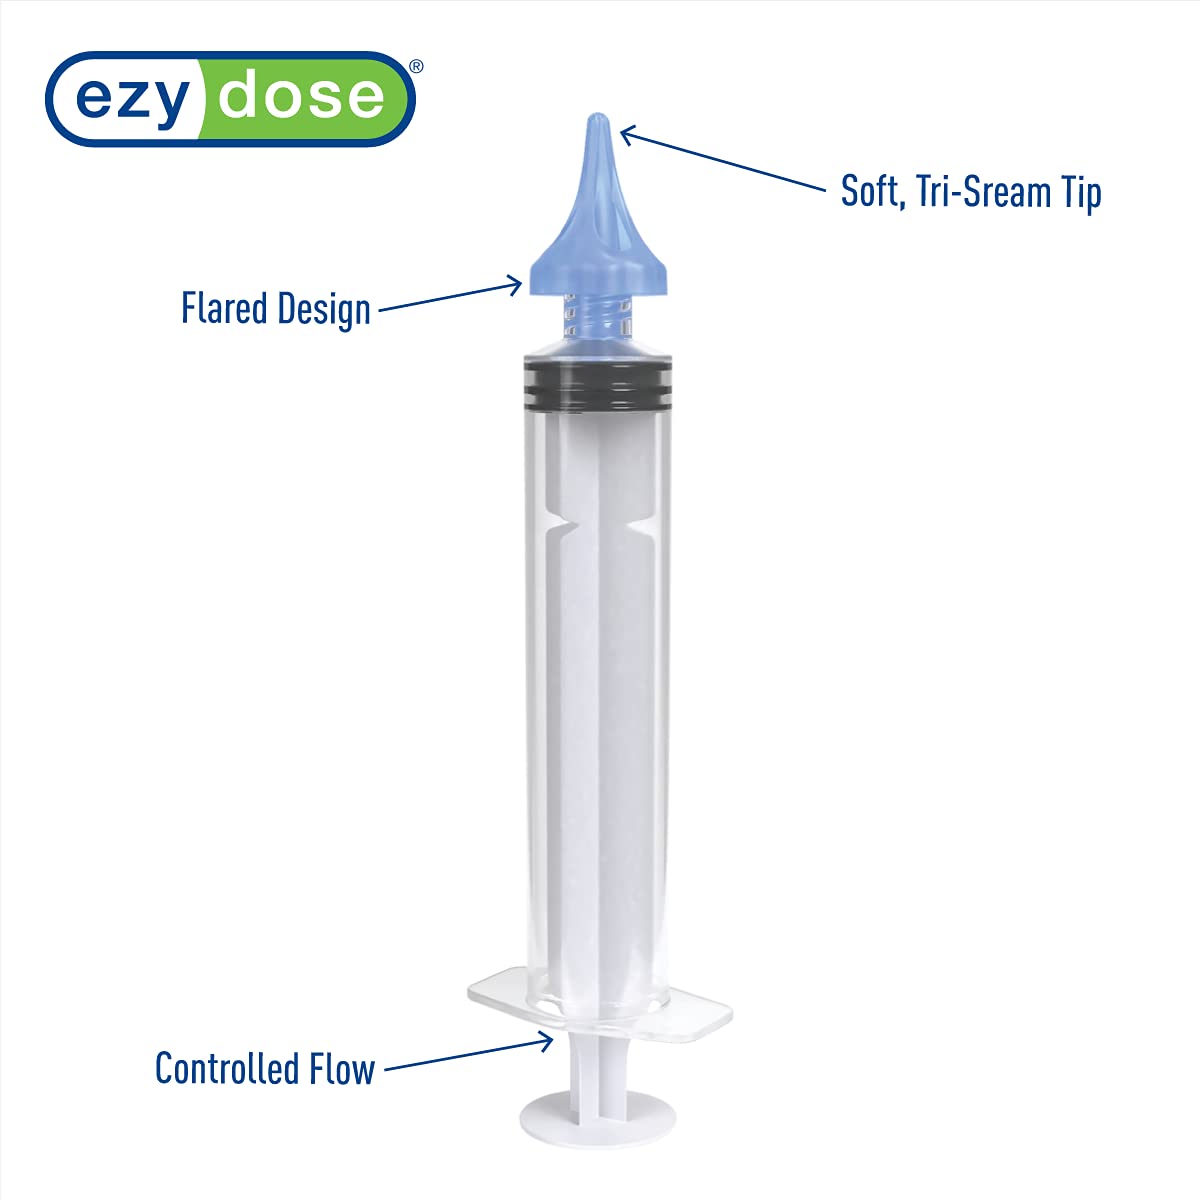 Ezy Dose Ear Wax Removal Syringe with Tri-Stream Tip, Perfect for Kids and Adults, 20mL Capacity